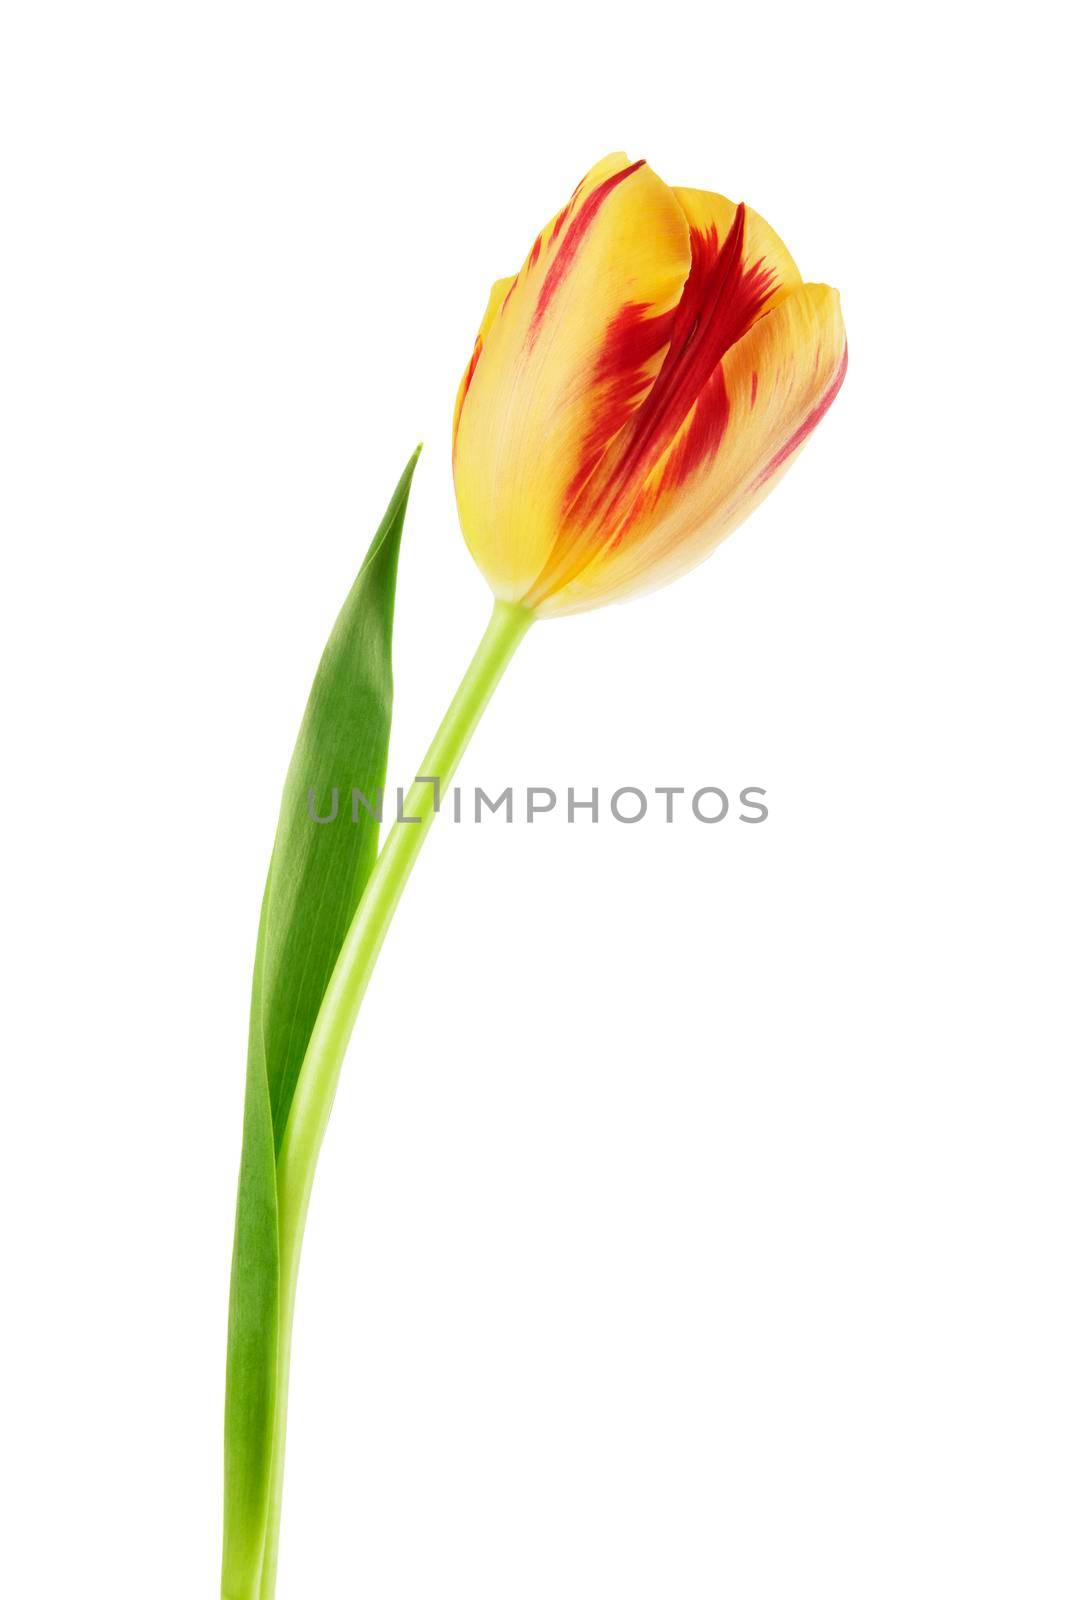 Tulip flower with stem and leaf, isolated on a white background.